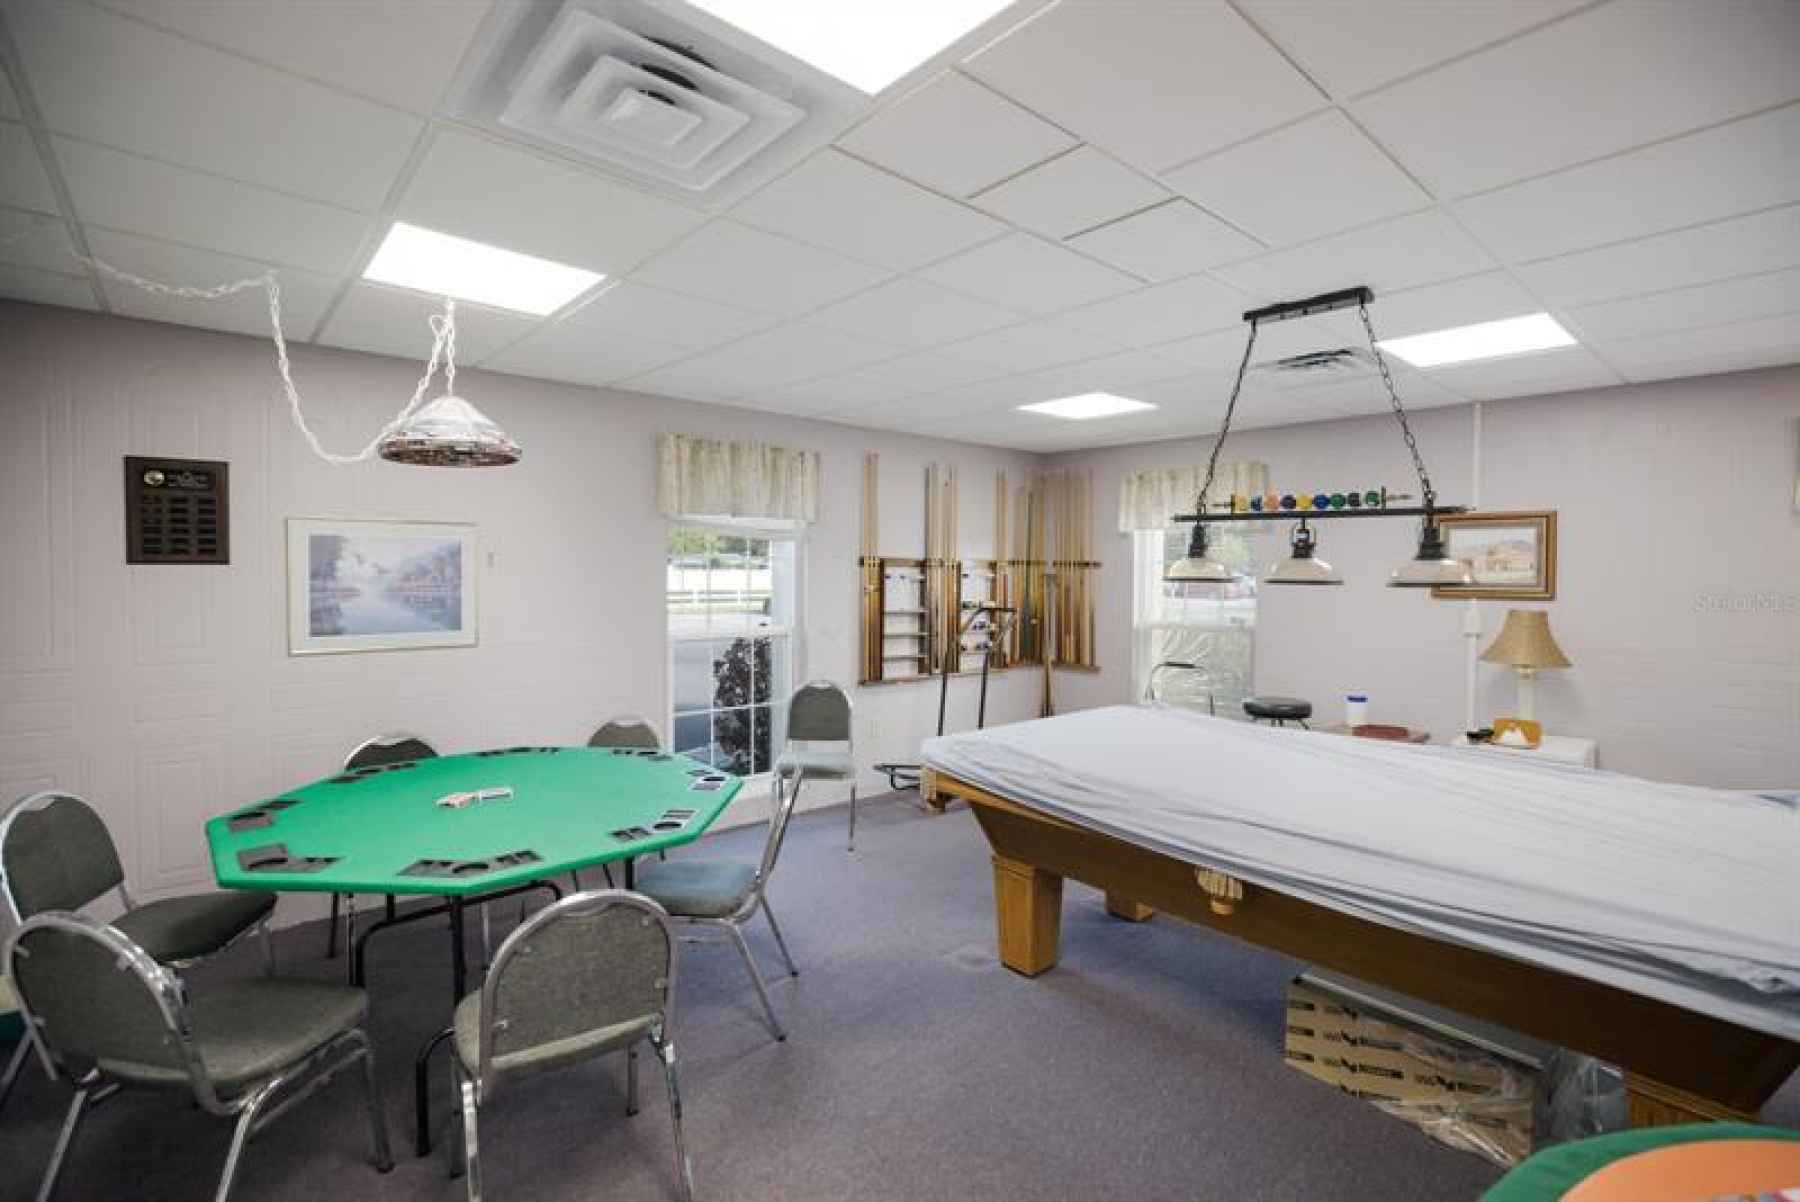 Pool table and rec room